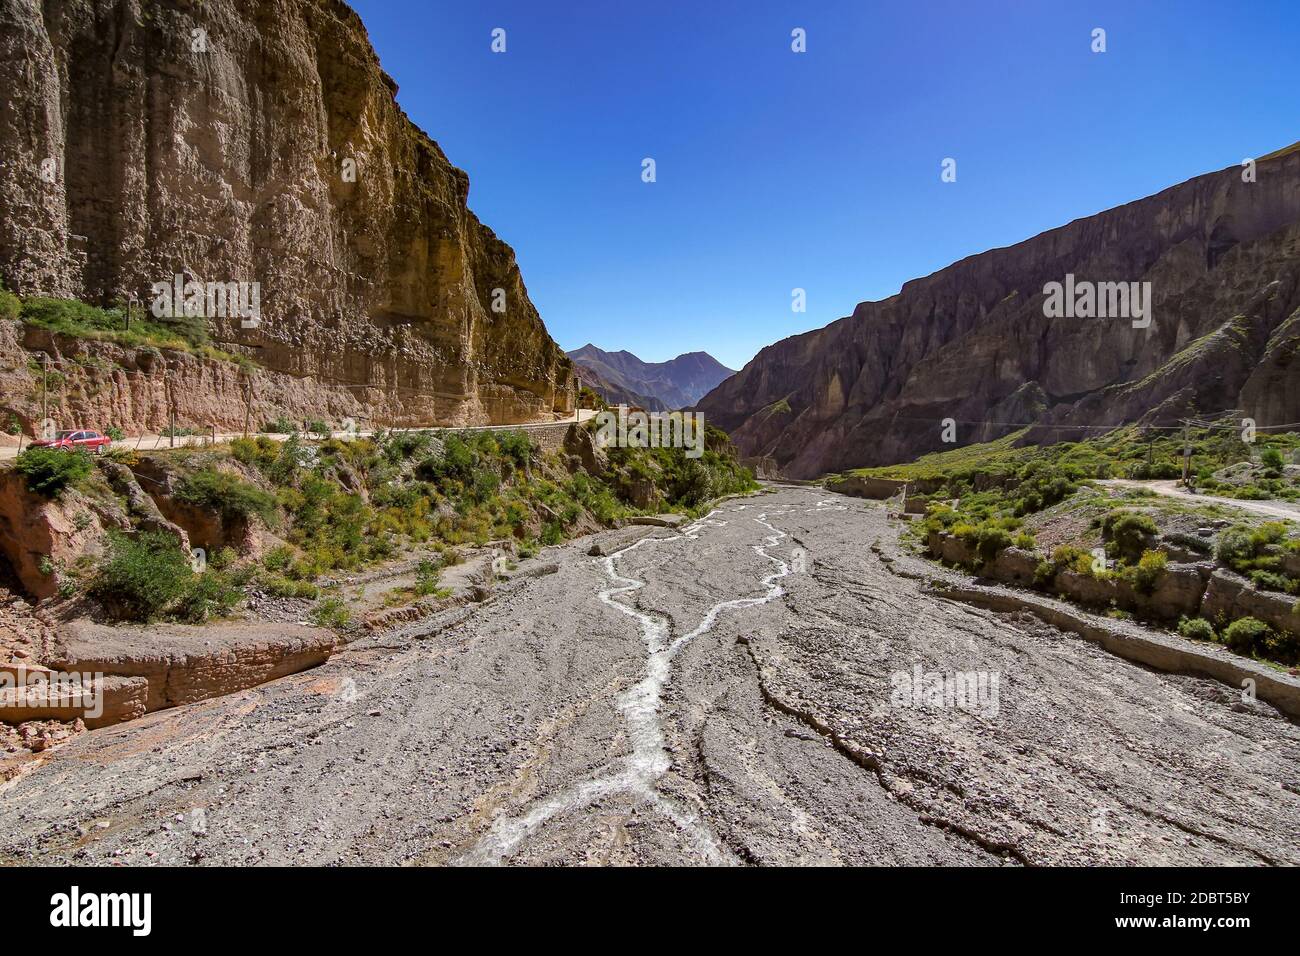 Landscape view of Iruya, Argentina, South America on a sunny day. Stock Photo